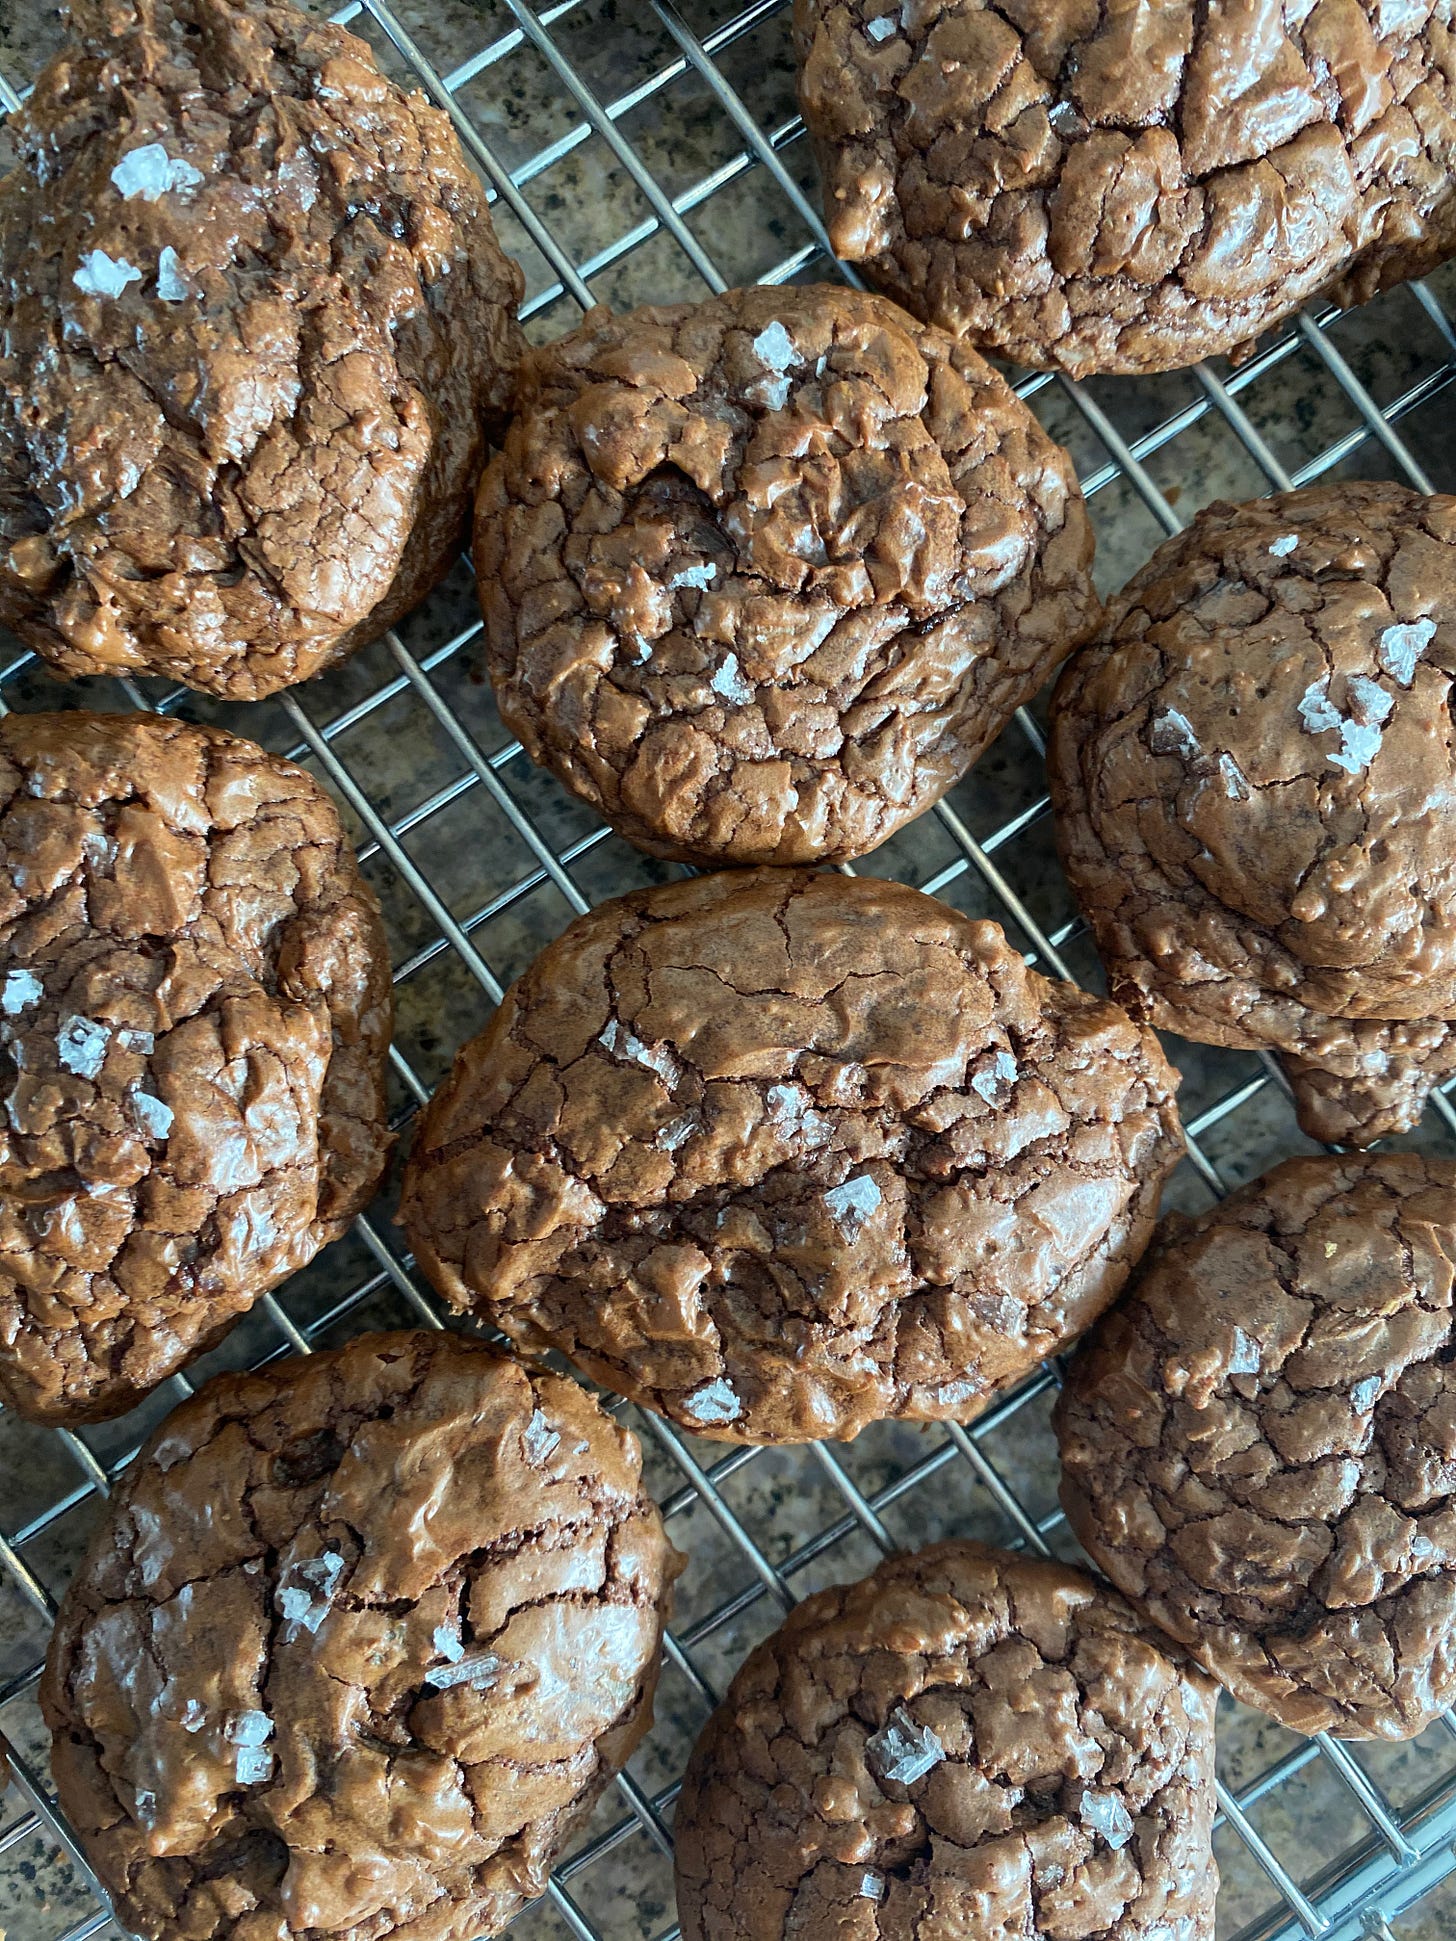 A closeup of several round, crinkly, slightly mounded chocolate cookies They are somewhat unevenly shaped, with lots of wrinkles and cracks, and big flakes of salt visible on top.